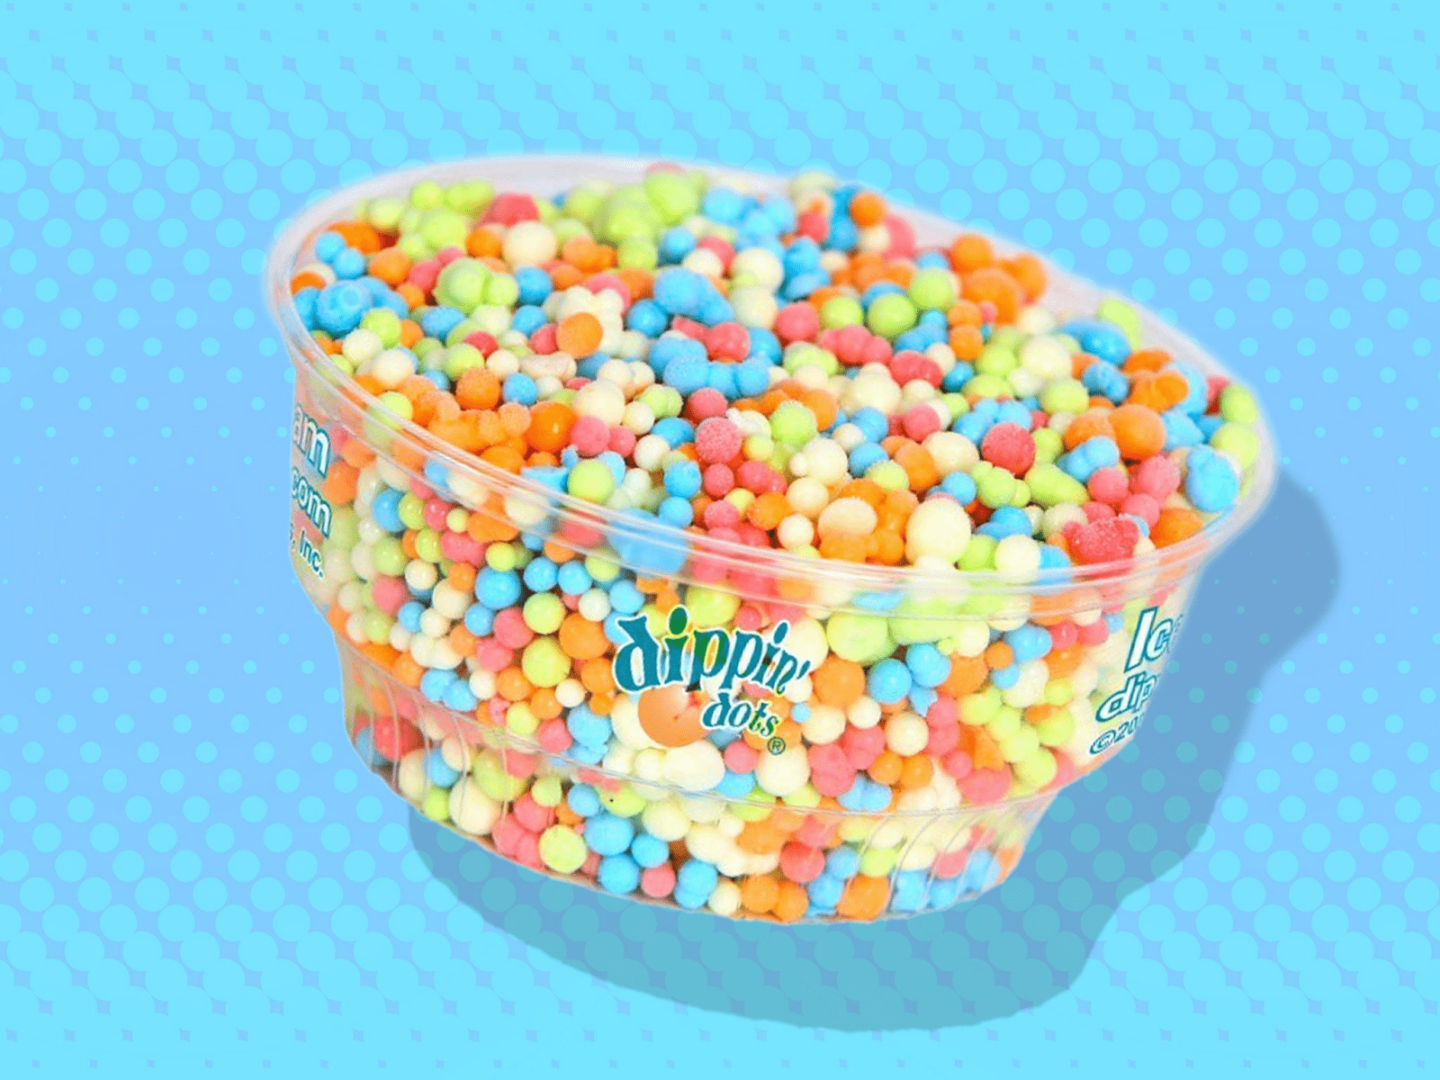 dipping dots from bankruptcy to riches